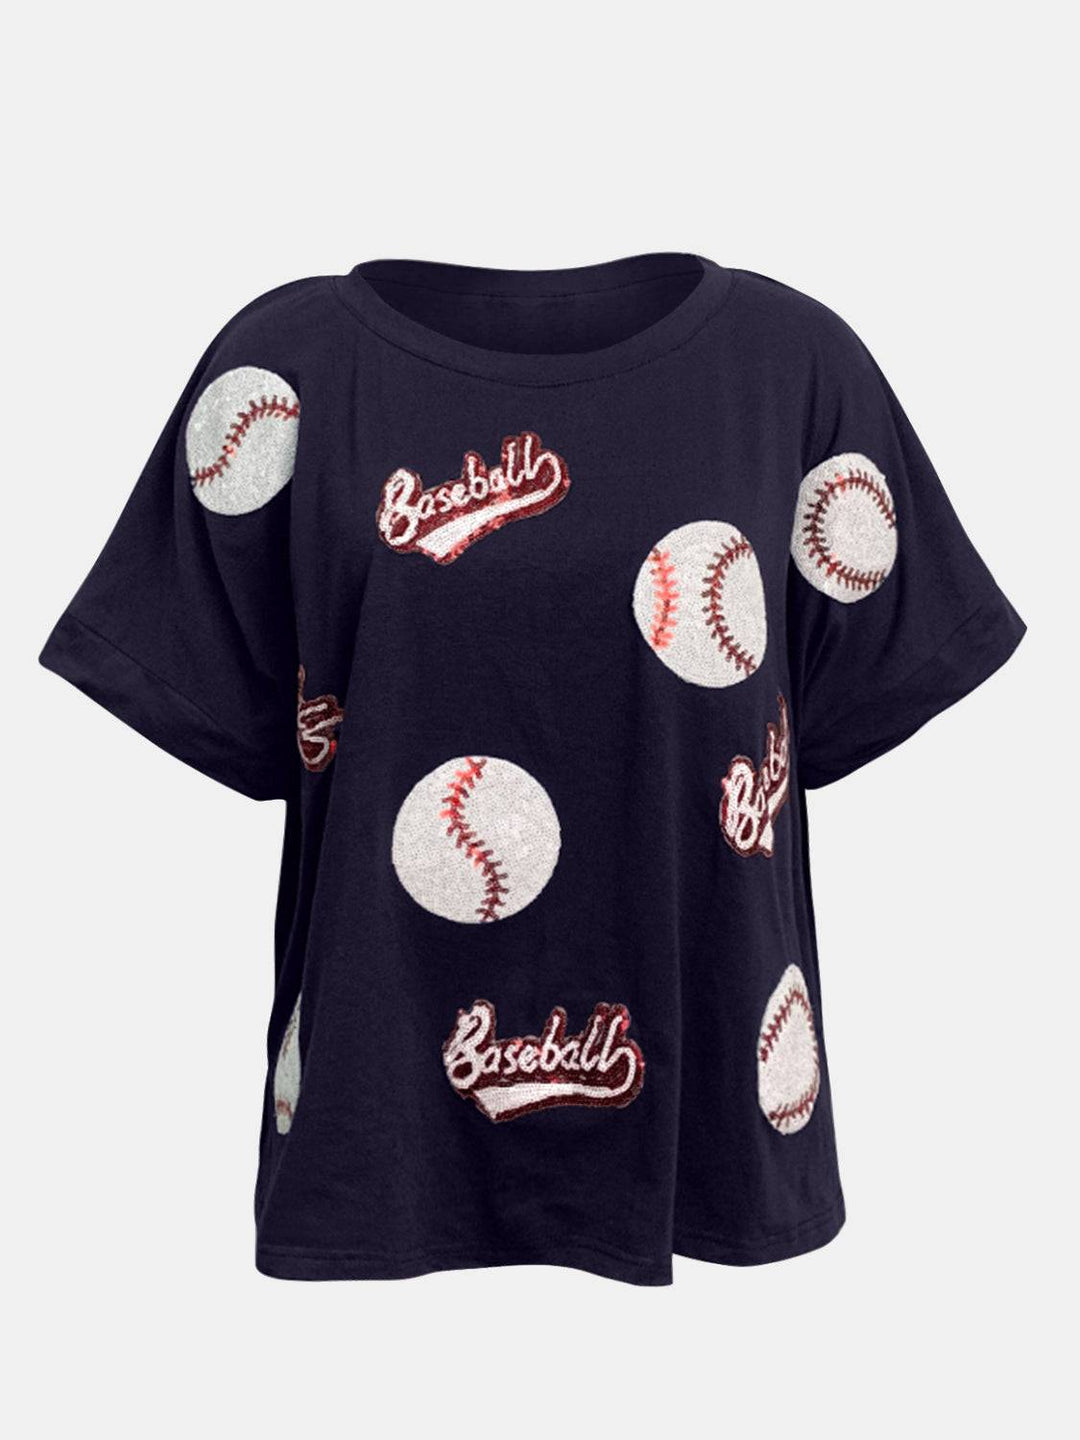 a women's t - shirt with baseballs on it